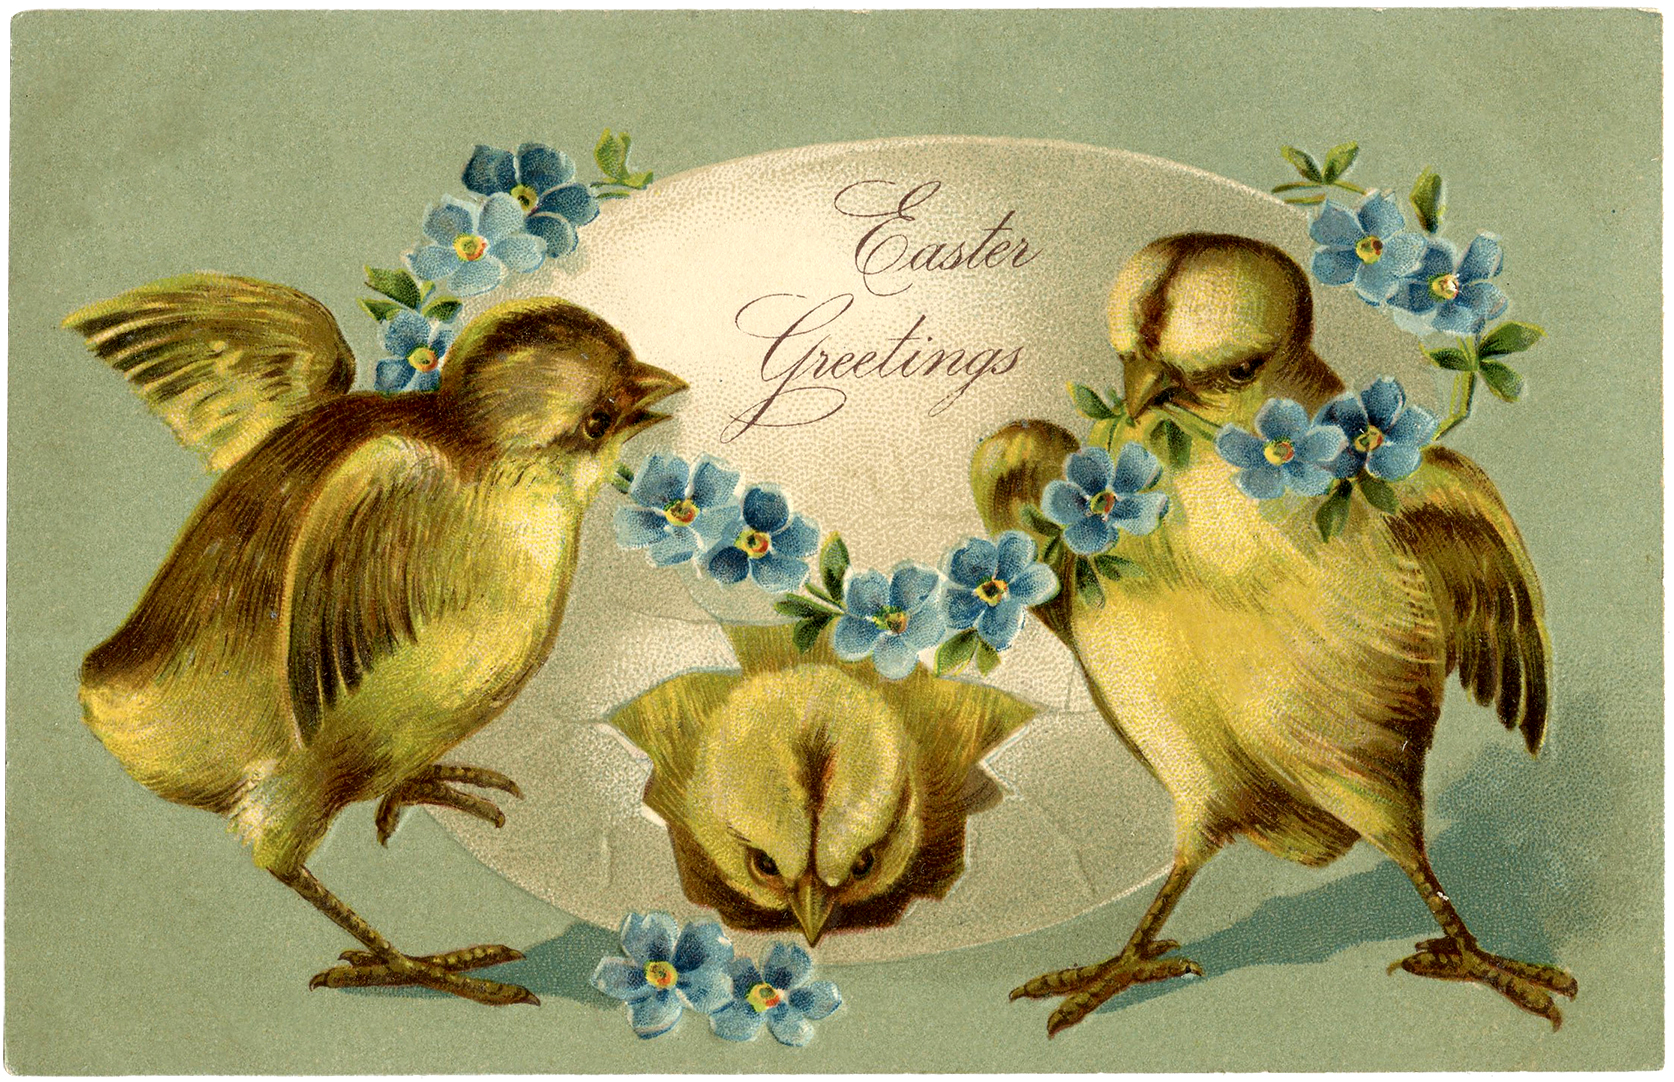 Vintage Easter Chicks Image - Adorable! - The Graphics Fairy